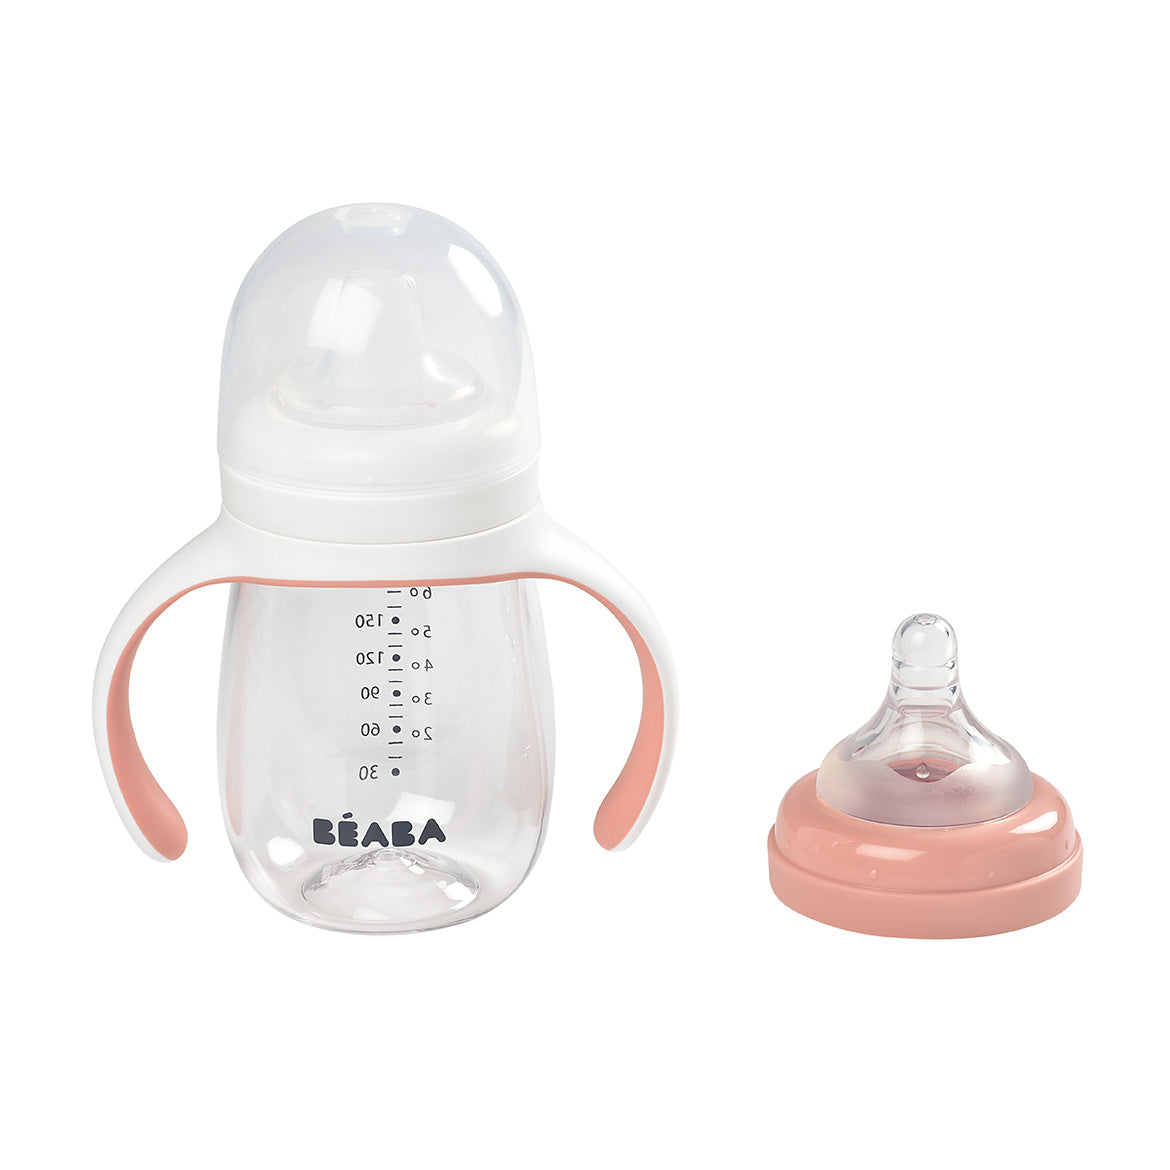 2-in-1 Learning Cup - Colour